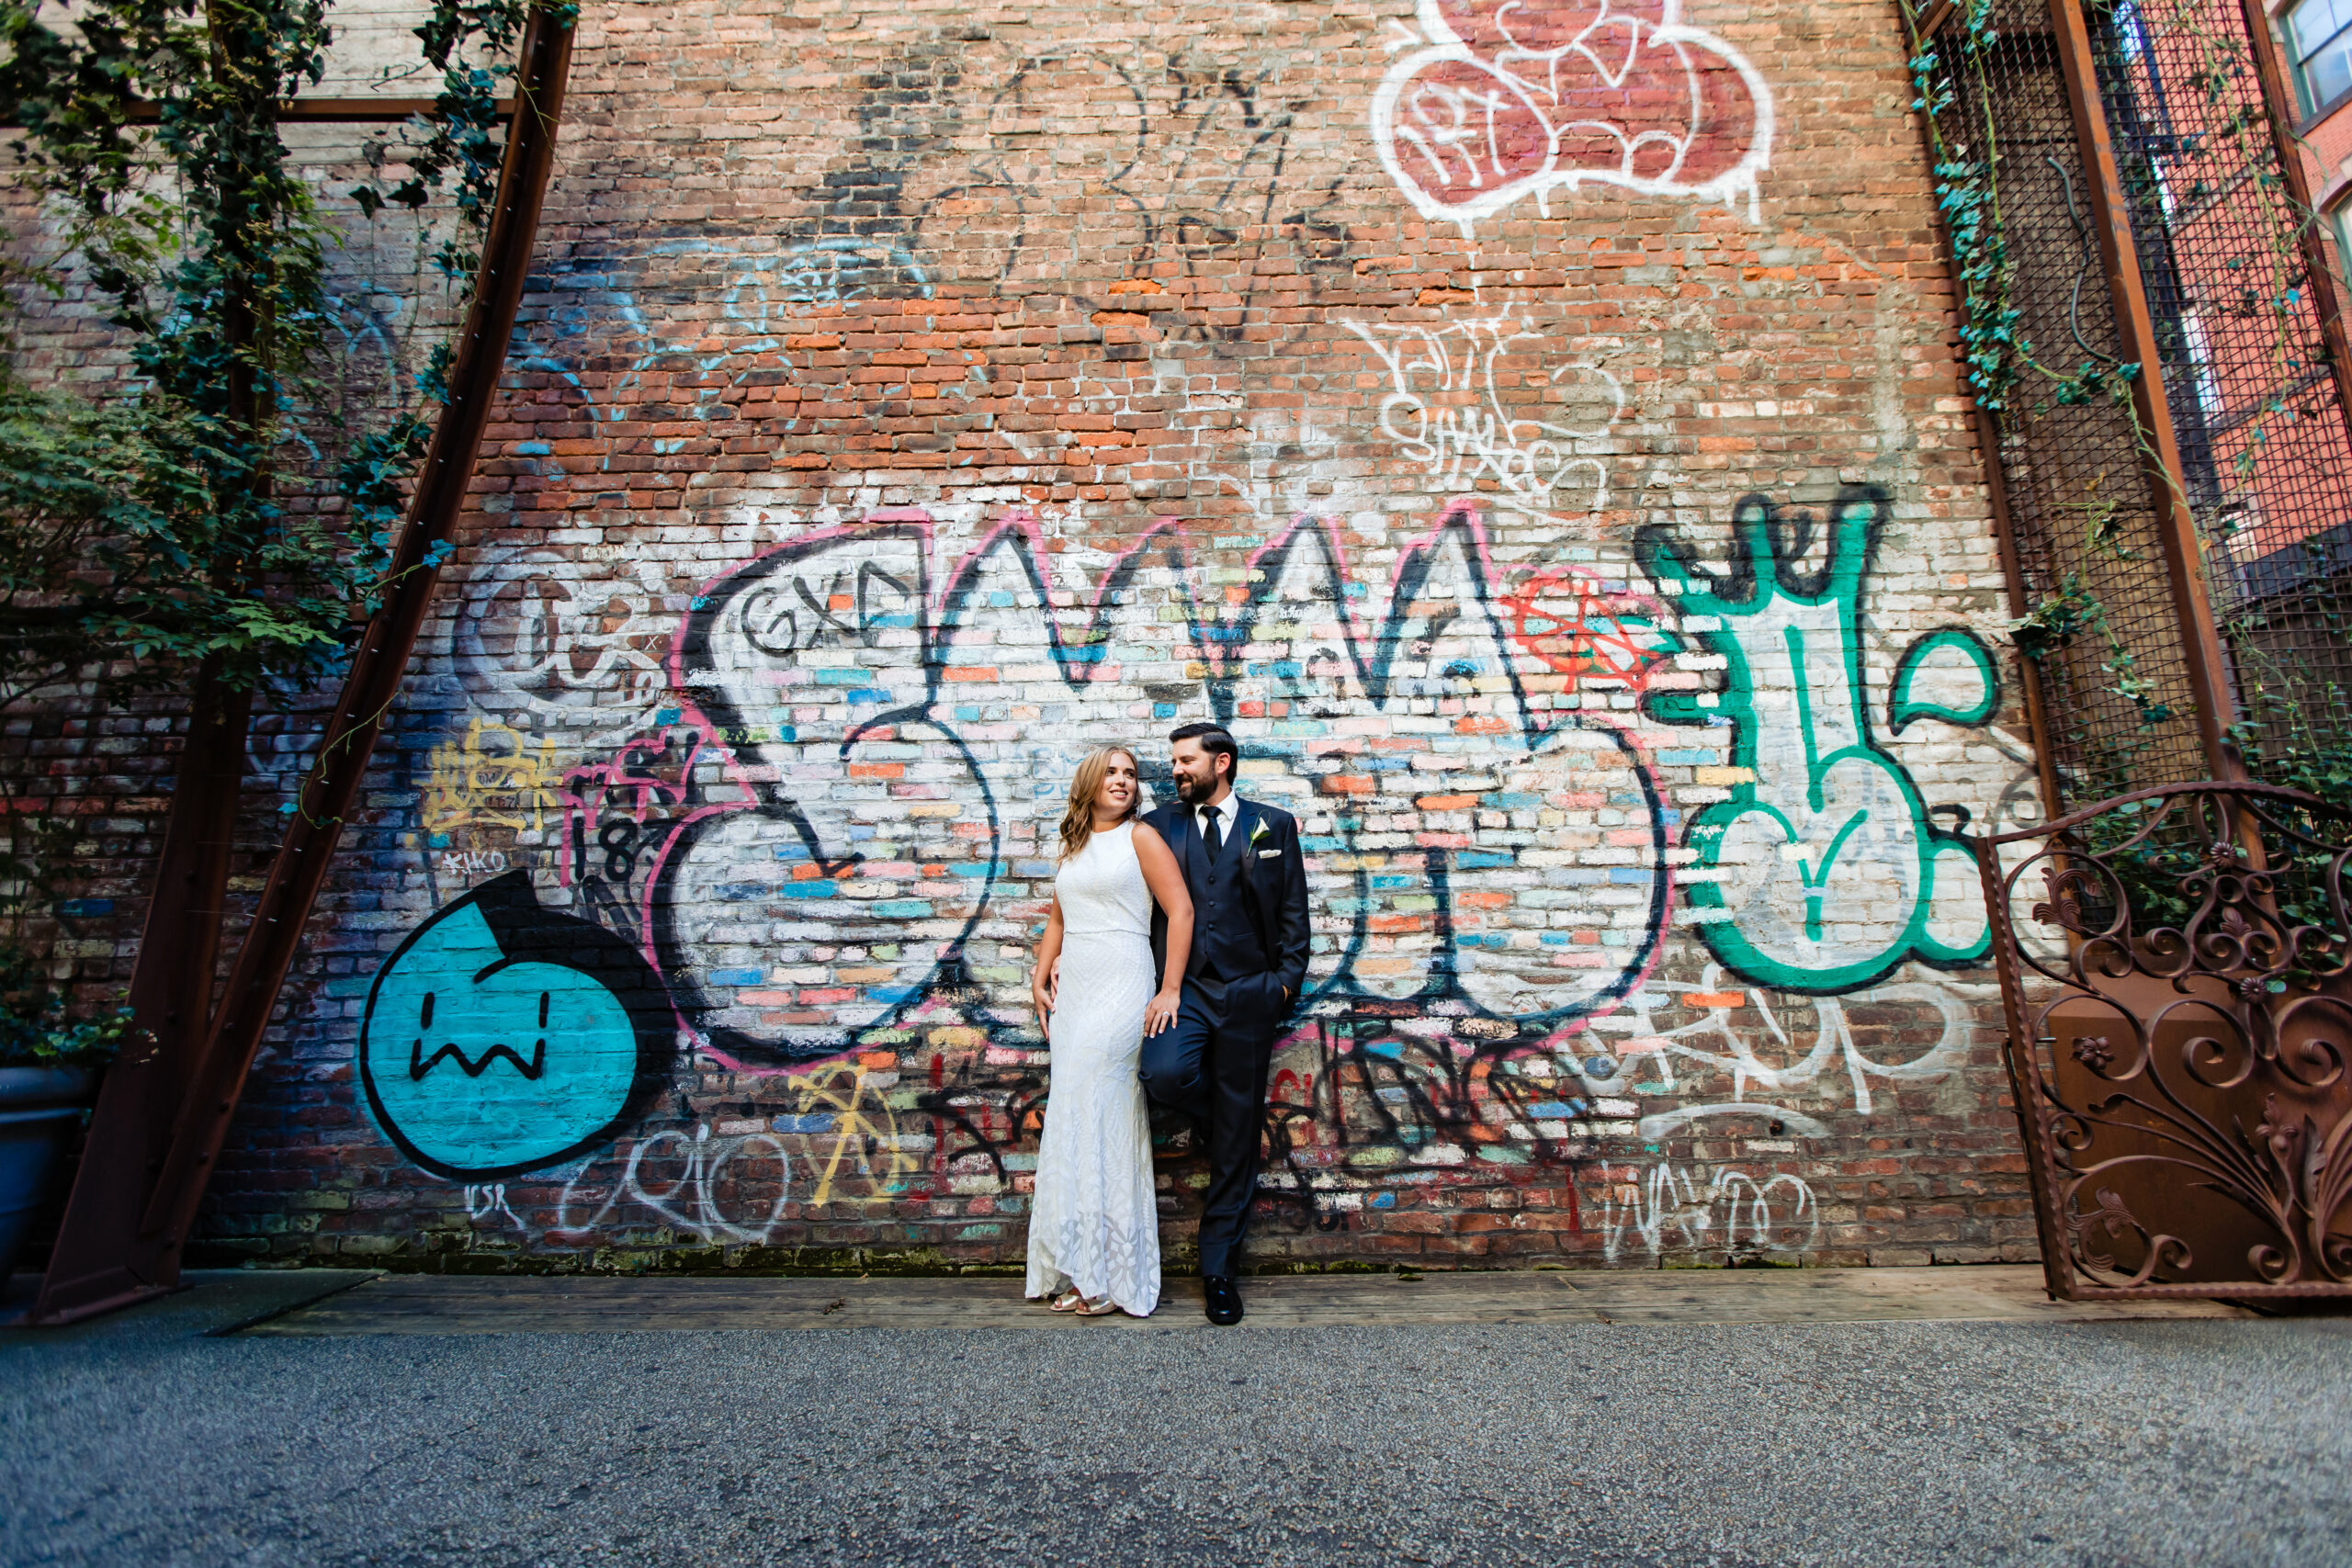 A stylish couple strikes a pose for a portrait against a vibrant graffiti wall art backdrop of The Nomo Soho hotel in New York City on their wedding day. The urban artistry adds a unique touch to their wedding portraits, skillfully captured by North Jersey wedding photographer Jarot Bocanegra